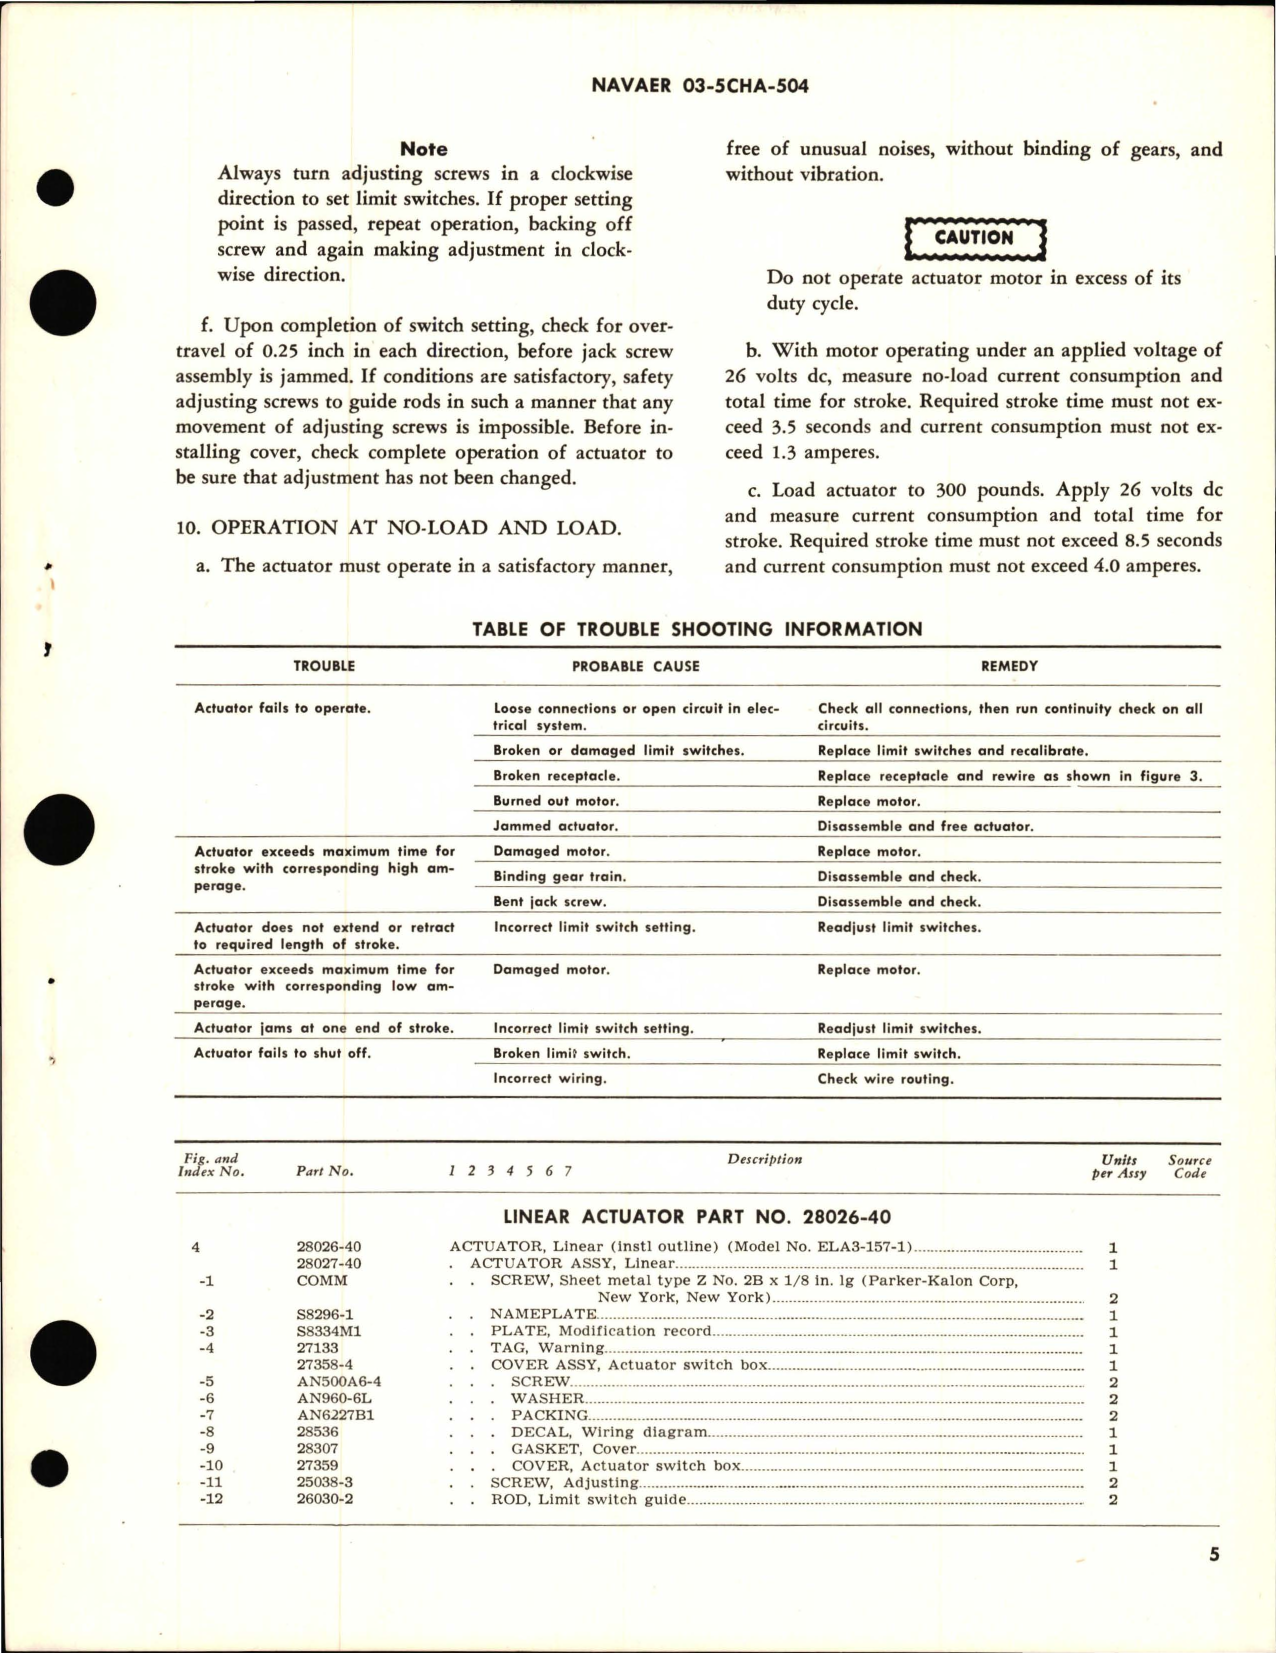 Sample page 5 from AirCorps Library document: Overhaul Instructions with Parts Breakdown for Linear Actuator - Part 28026-40 - Model ELA3-157-1